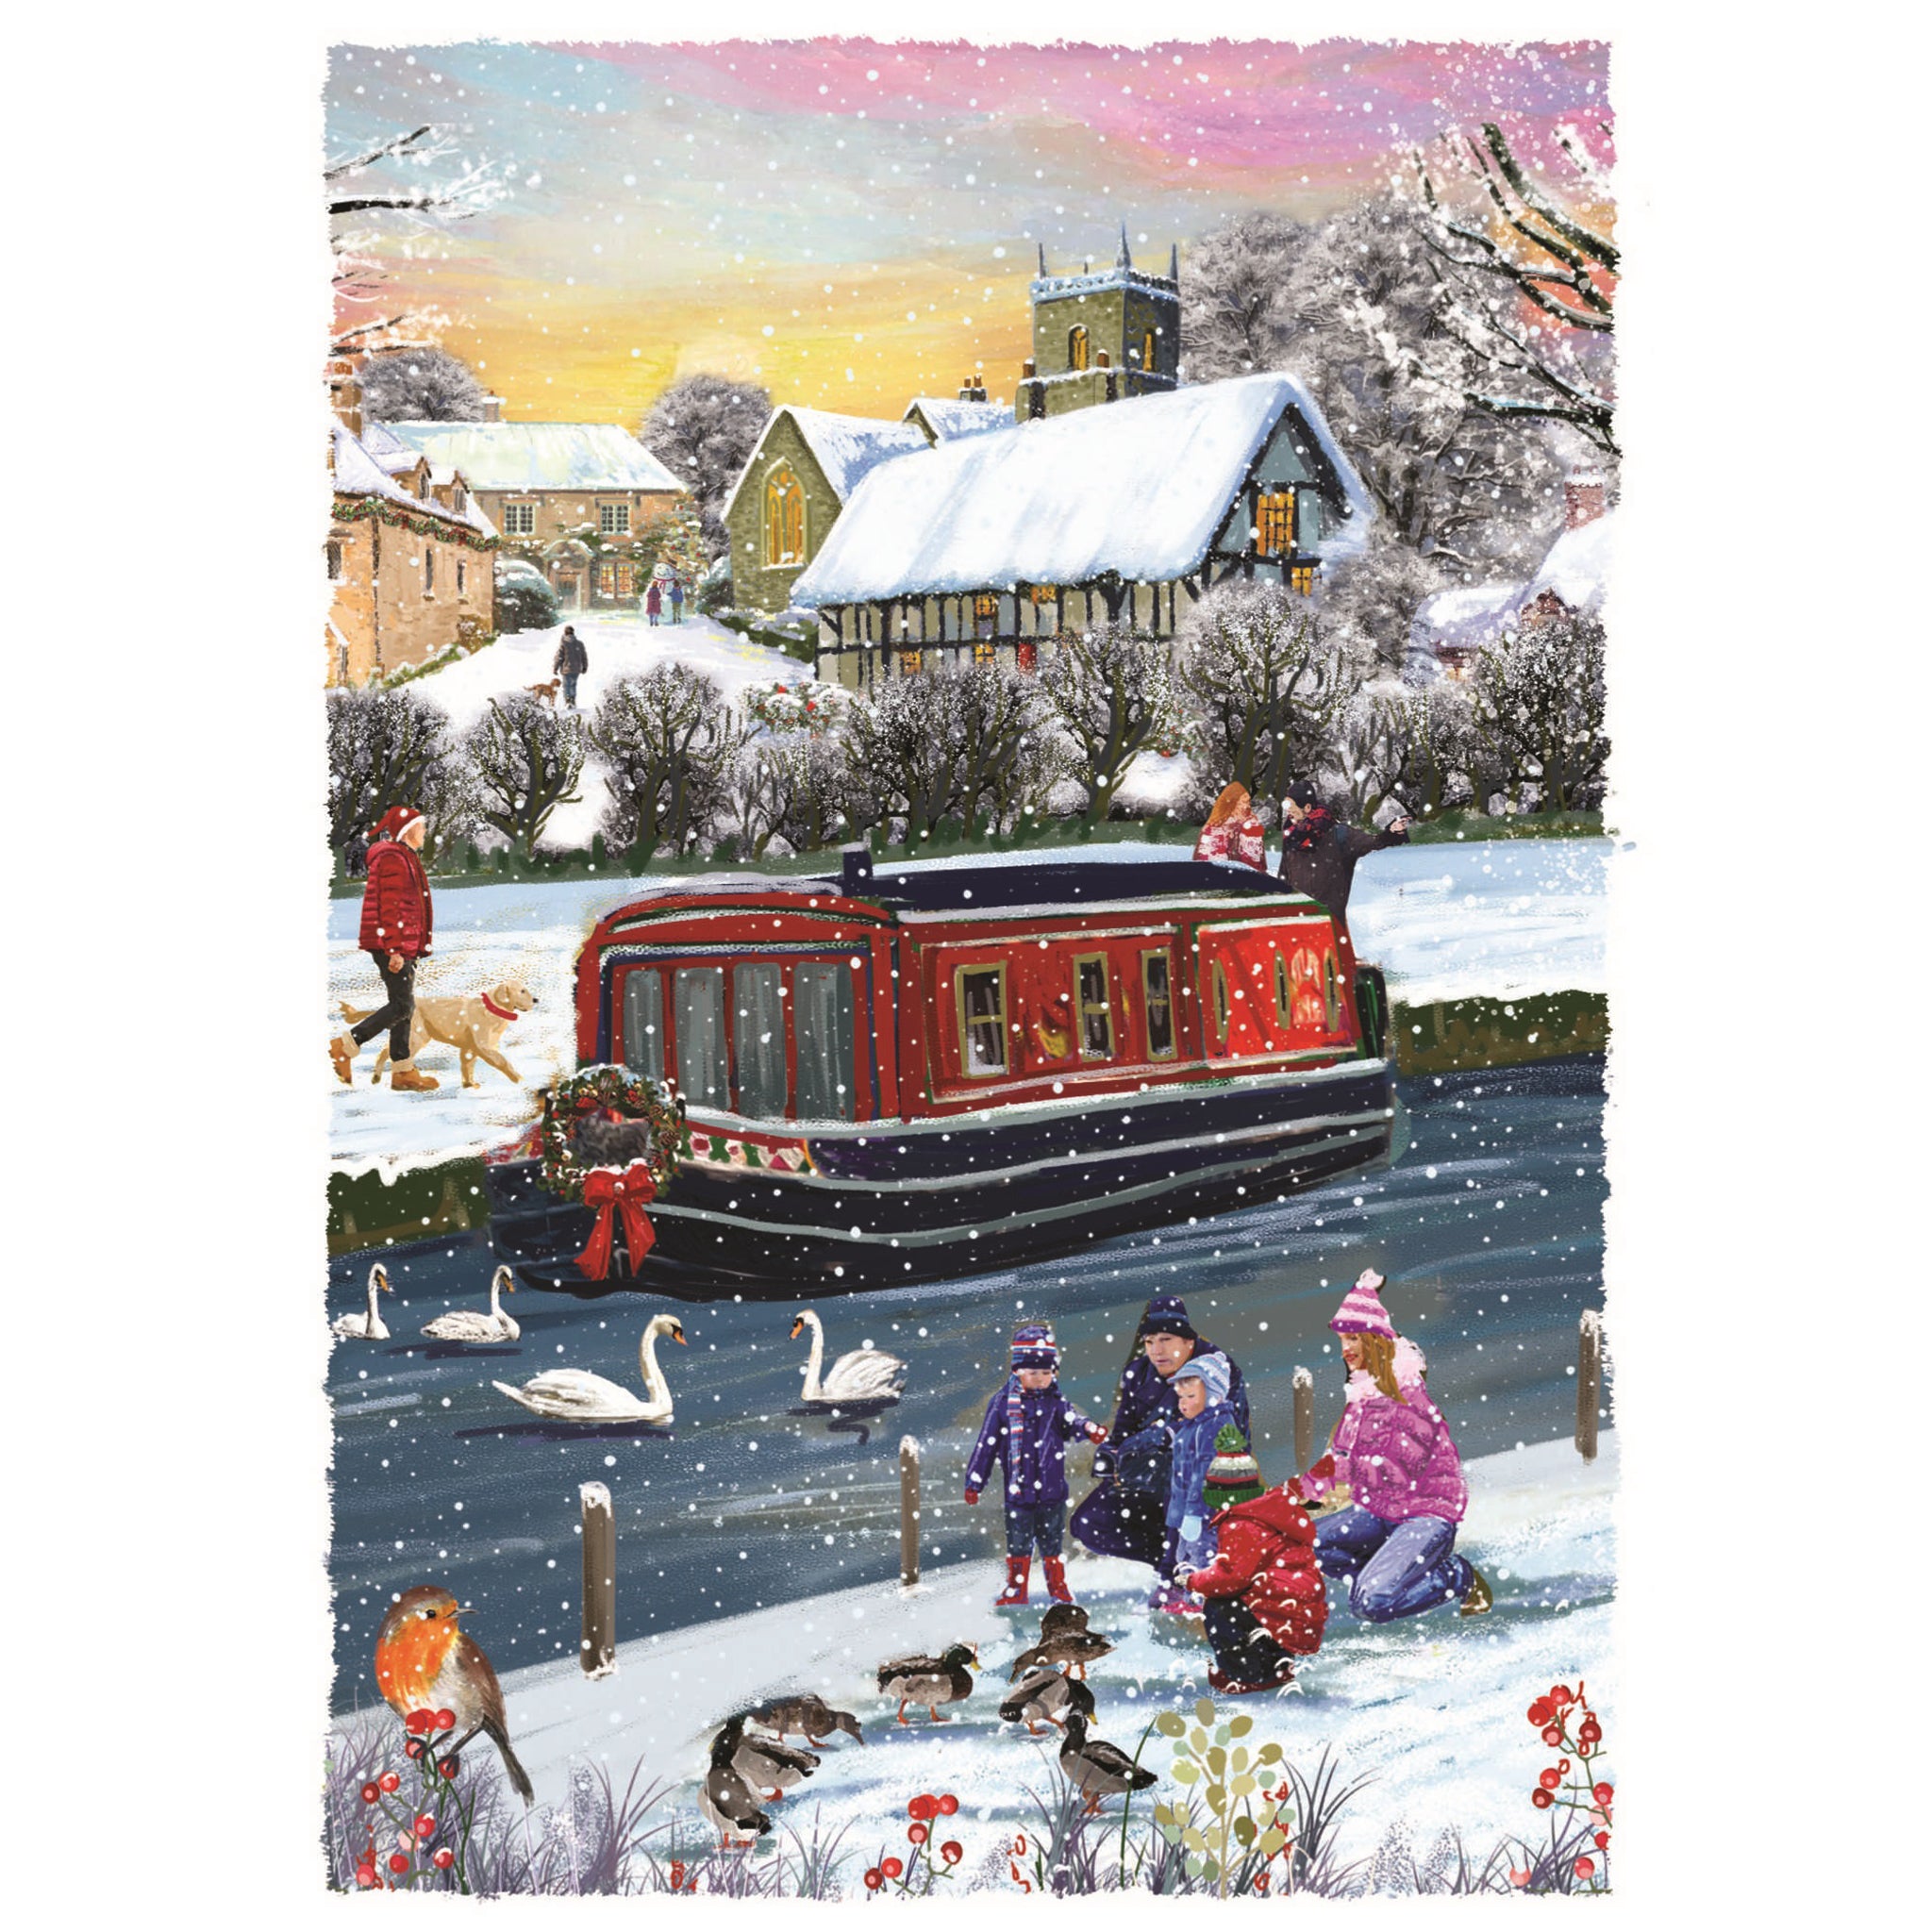 Snowy scene showing a red canal boat with a robin in the foreground, a family feeding the ducks, swans on the canal and a Yellow Labrador being walked on along the canal. In the background shows buildings with lights on and snow on their roofs. 